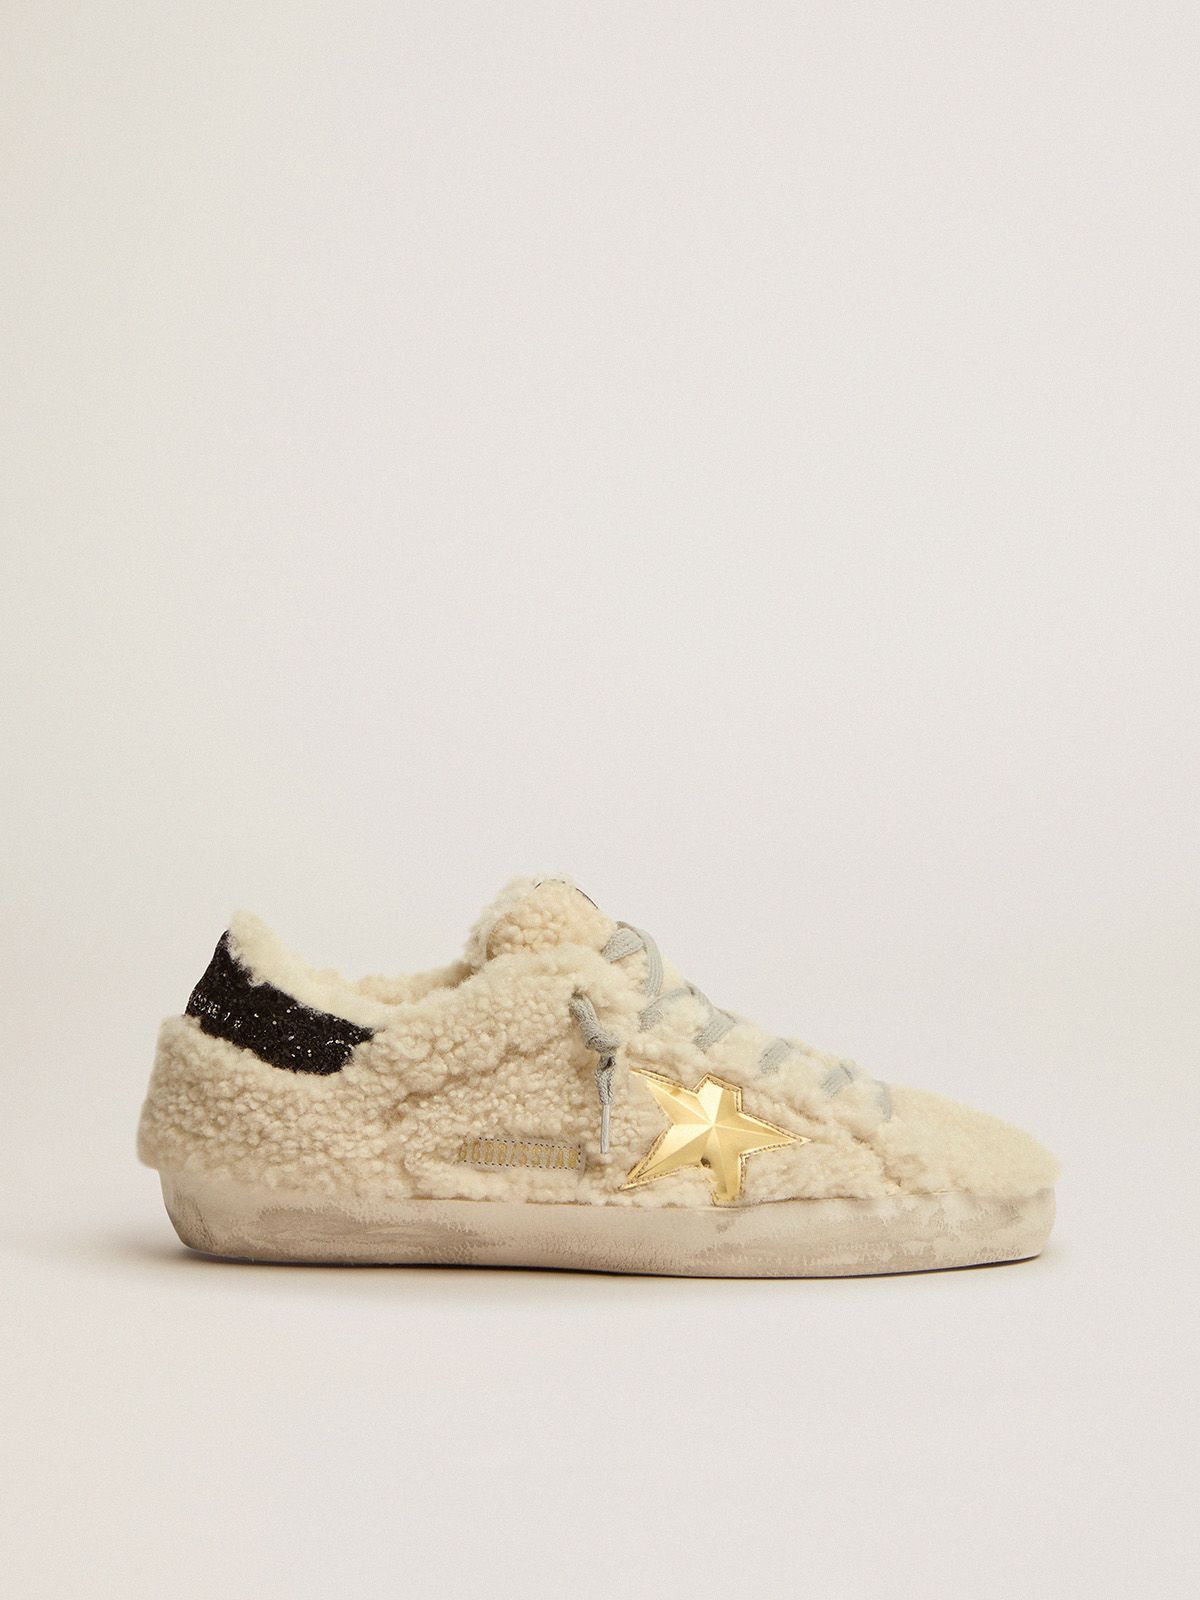 Sneakers Uomo Golden Goose Super-Star sneakers in shearling with gold 3D star